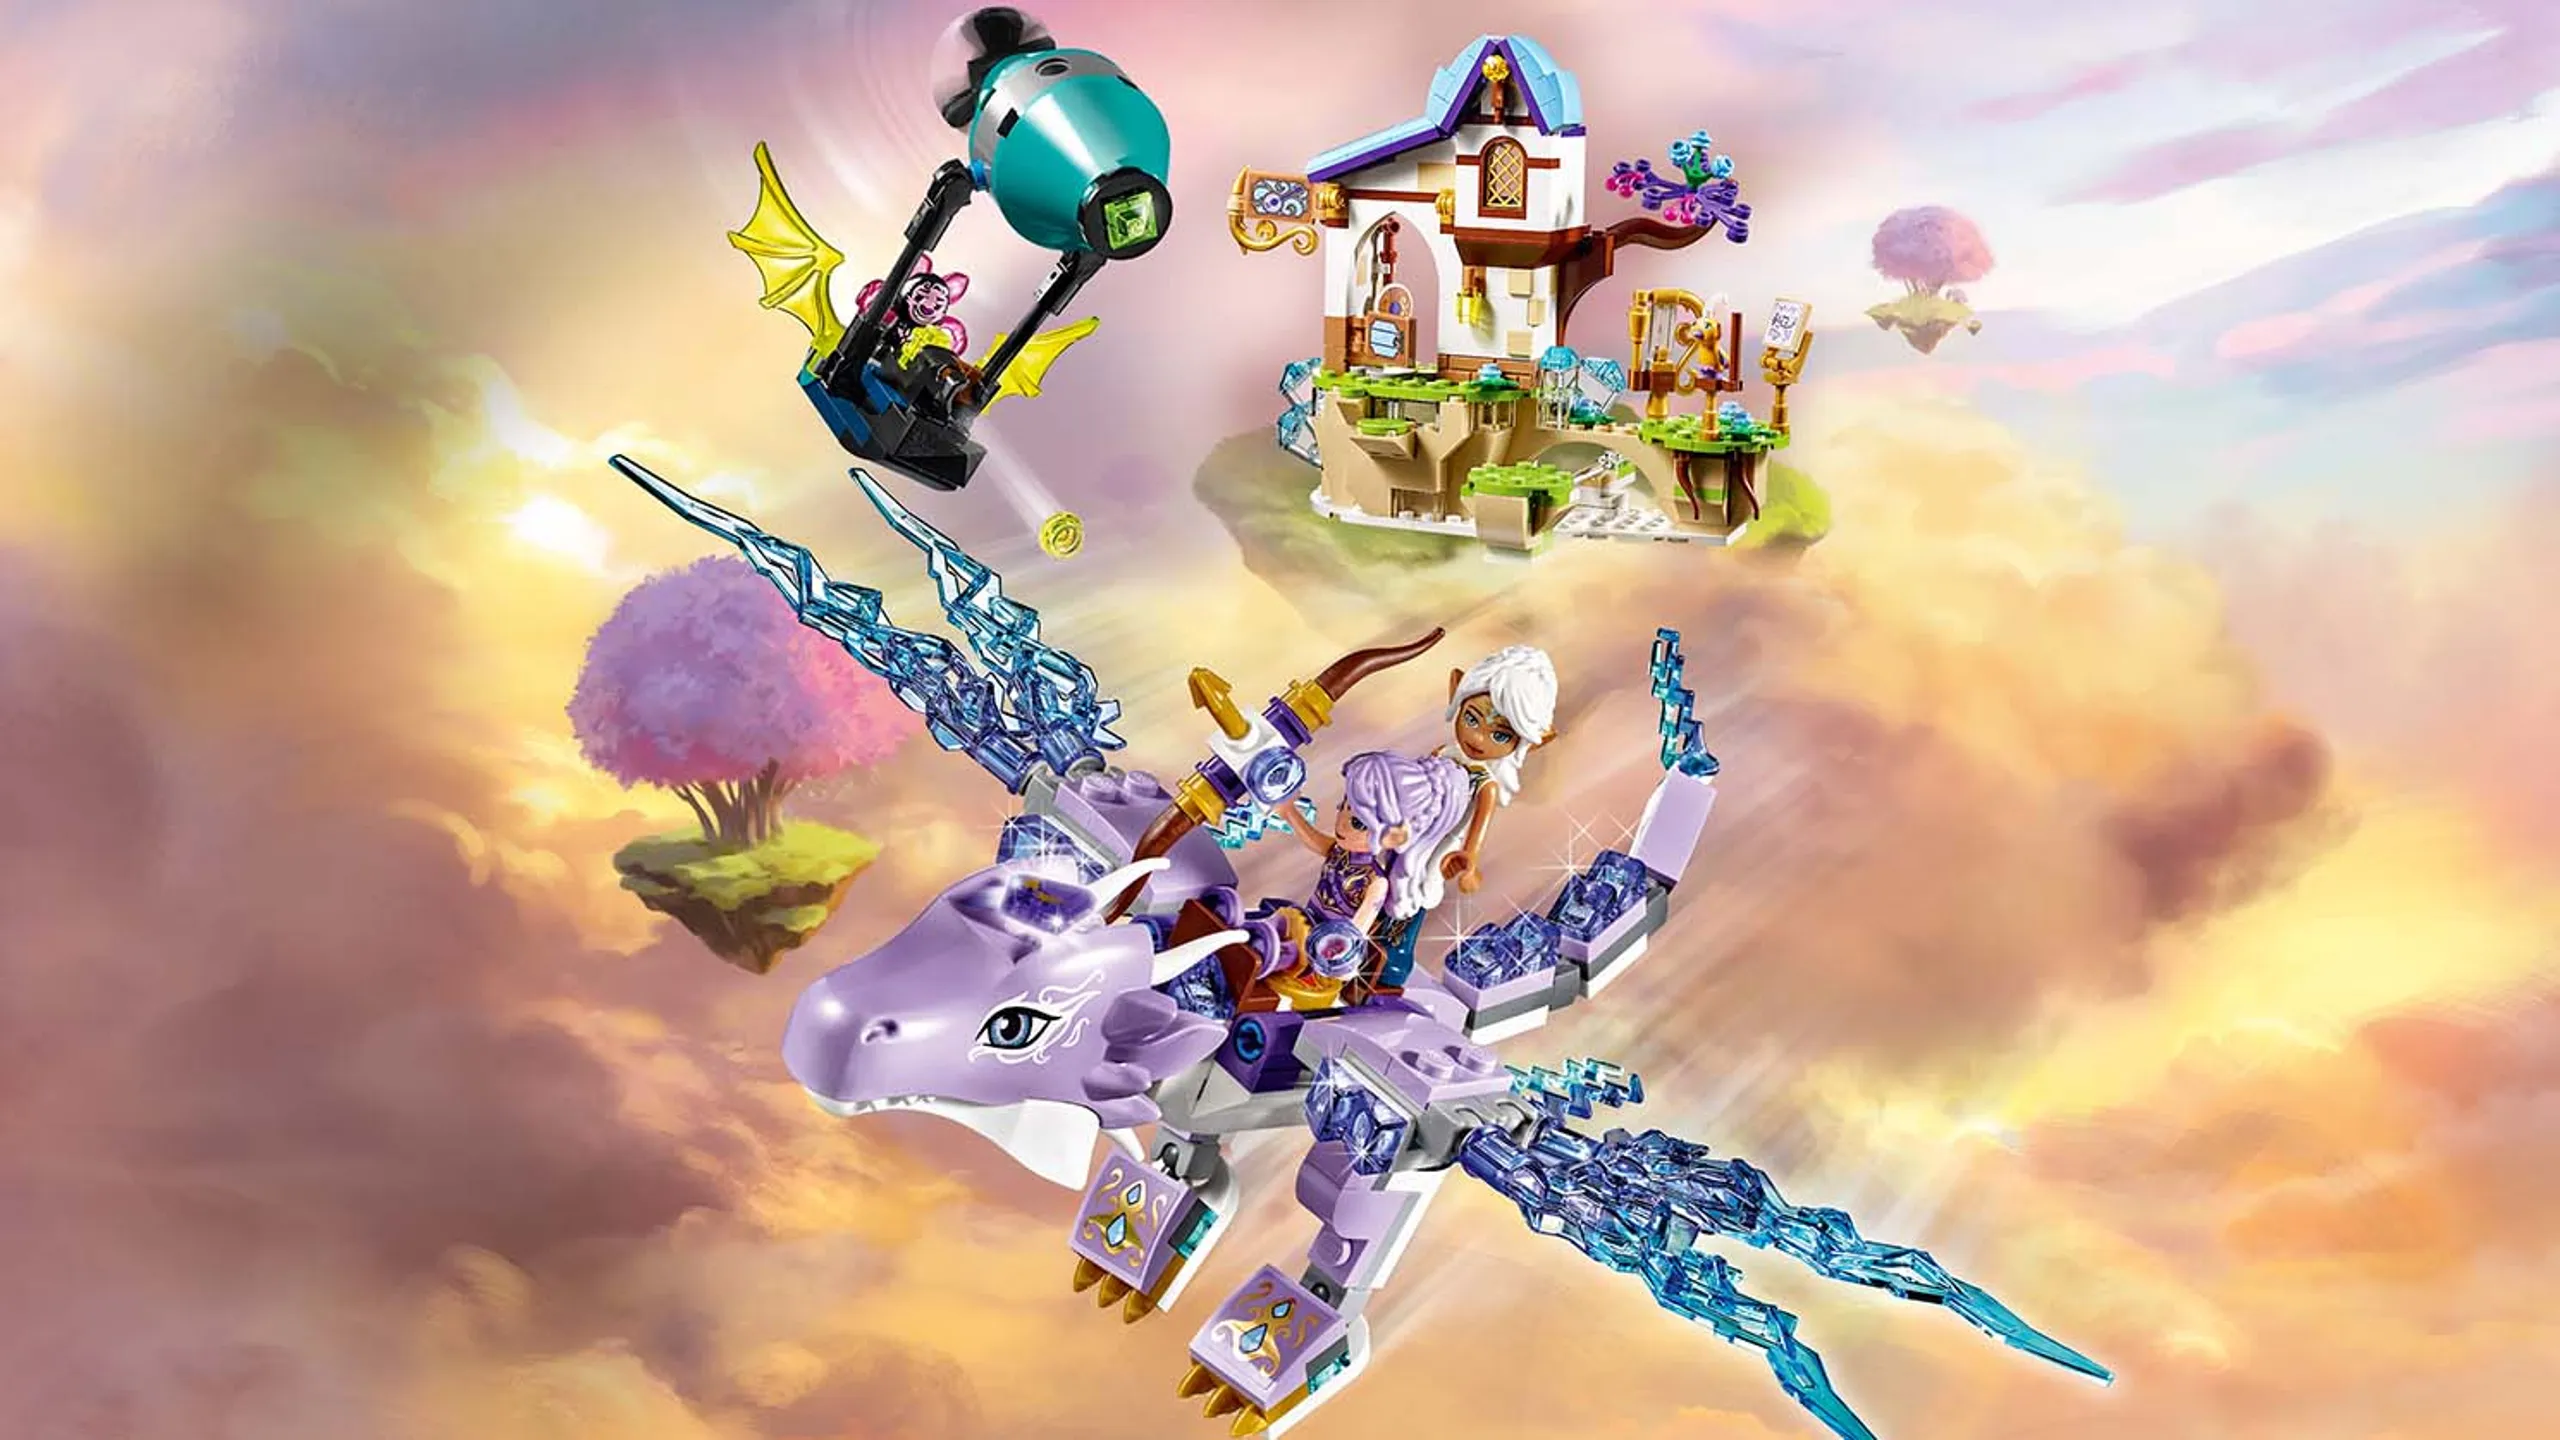 LEGO Elves - 41193 Aira & the Song of the Wind Dragon - Aira and Lumia are flying on Cyclo the Guardian Wind Dragon that is under attack by a evil shadow bat that tries to steal the magic Wind diamond.